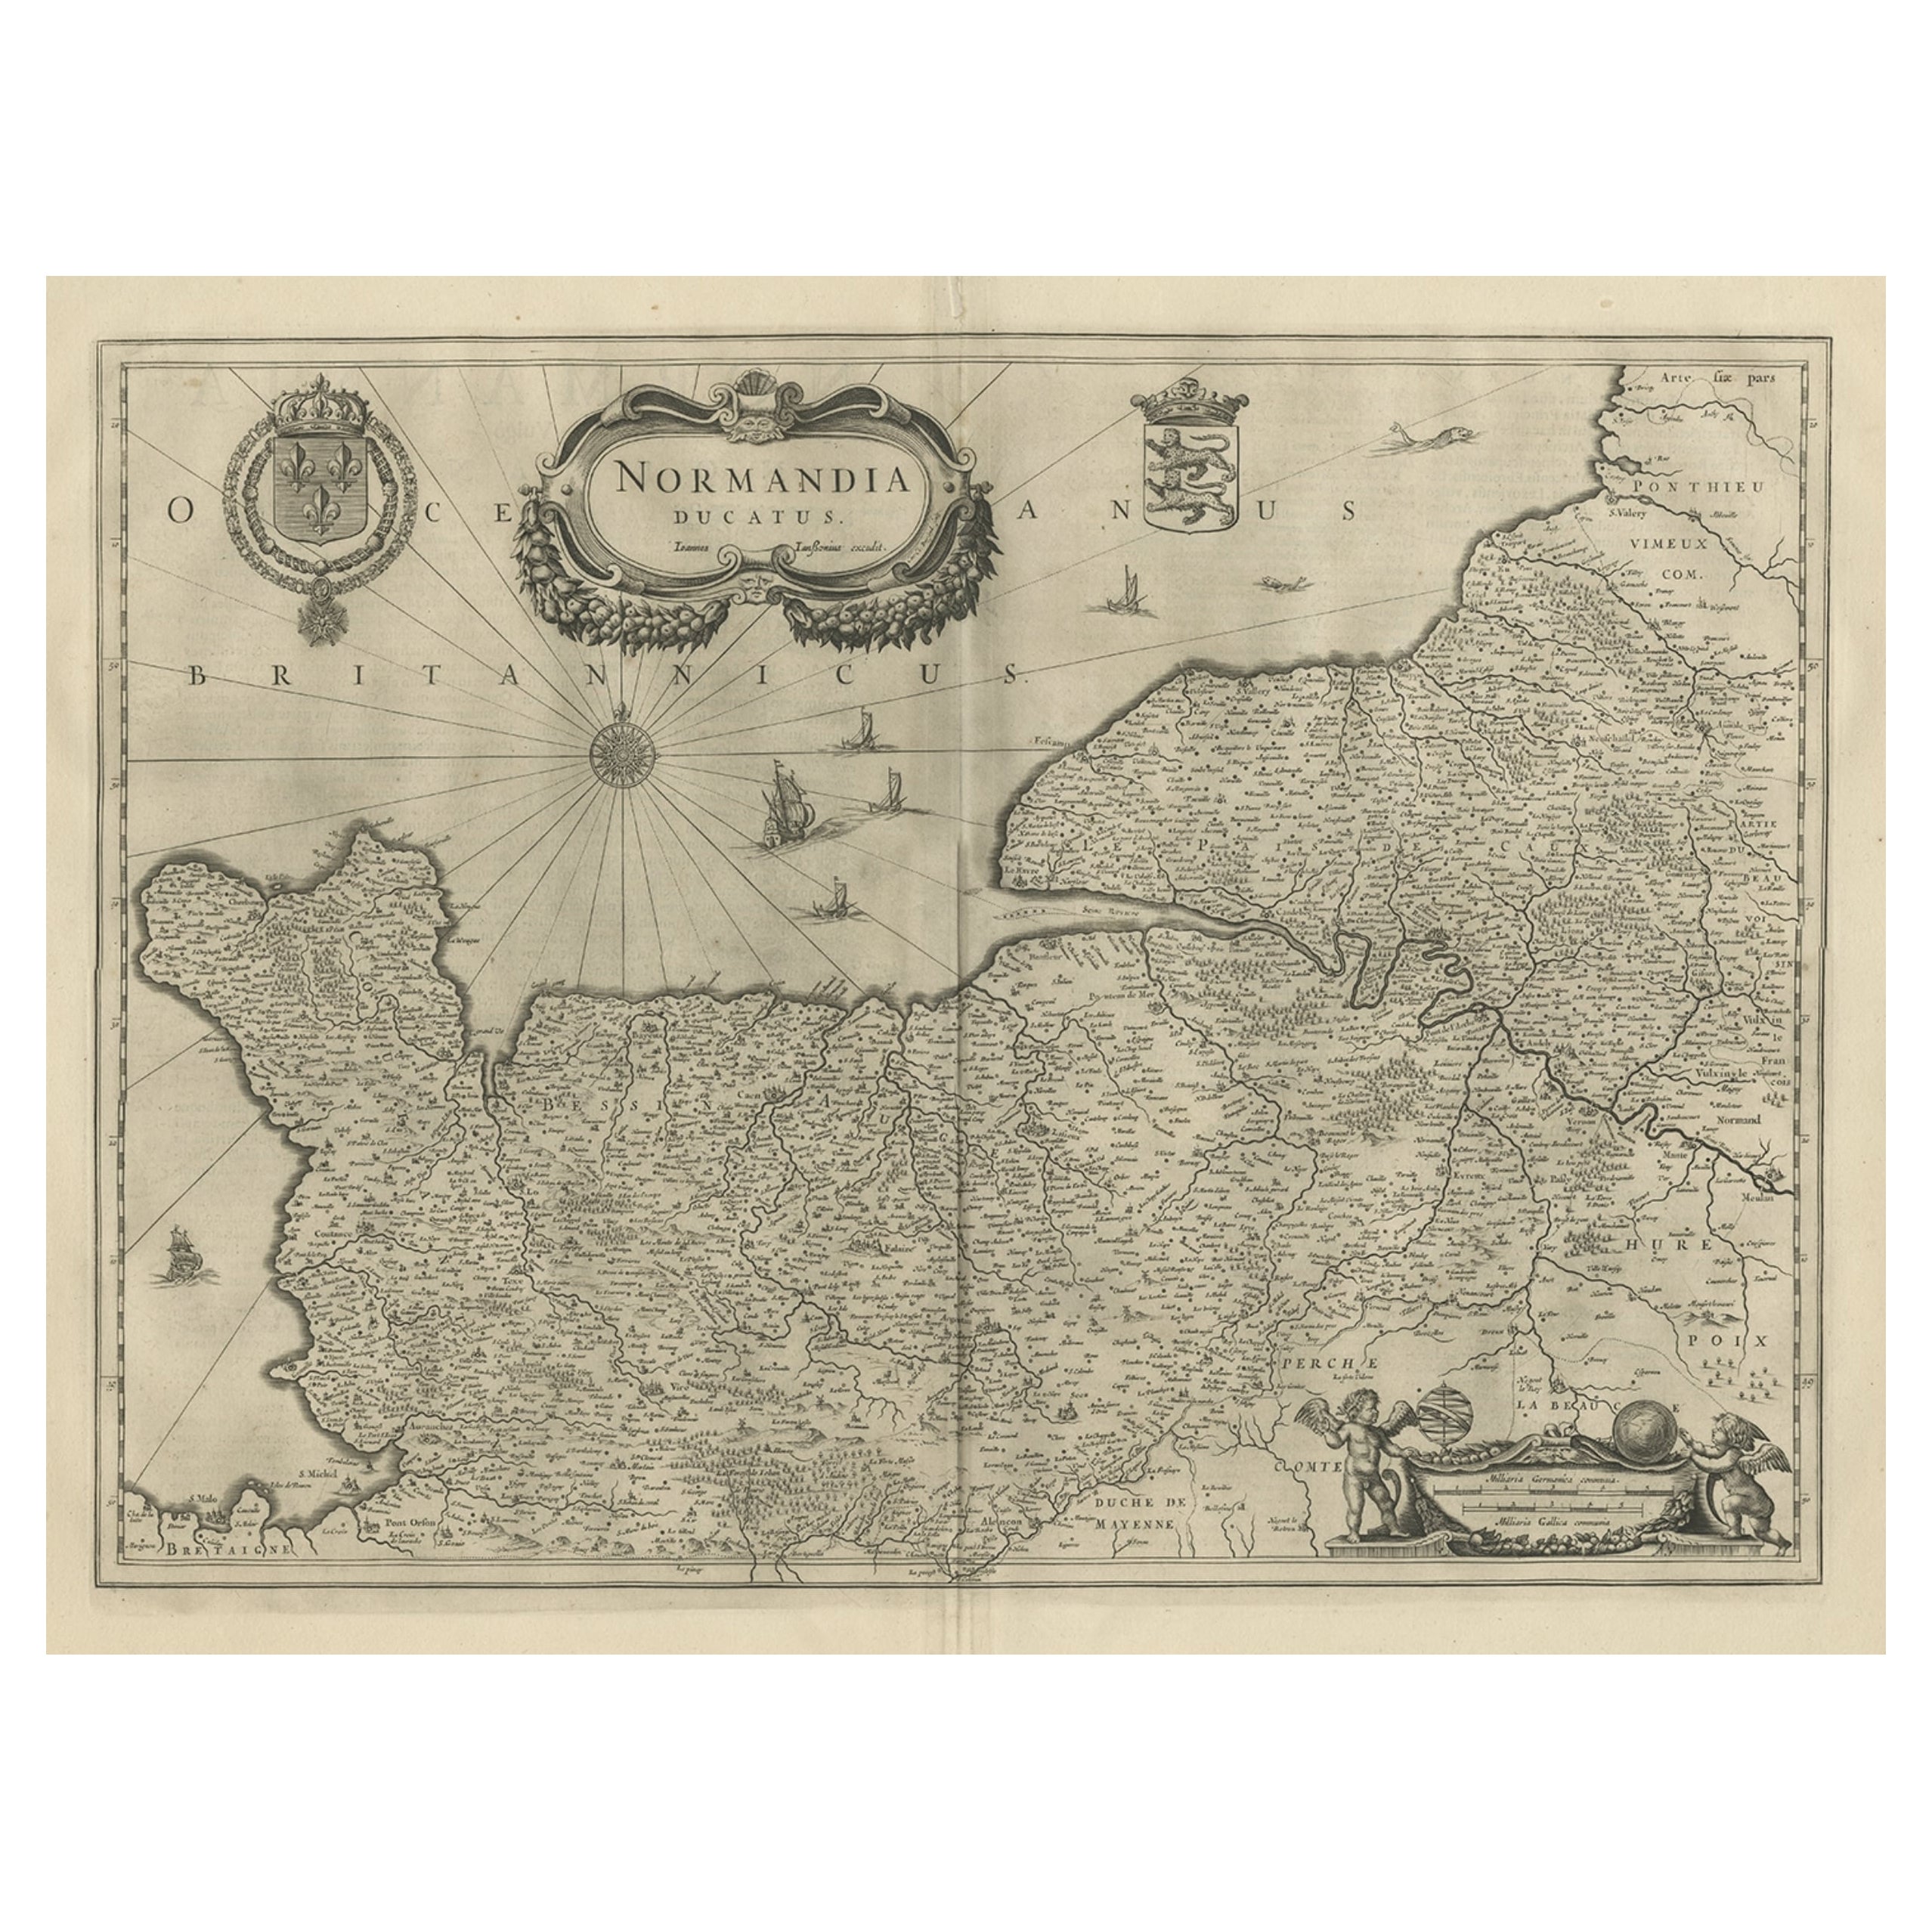 Antique Map of Normandy by Janssonius, 1657